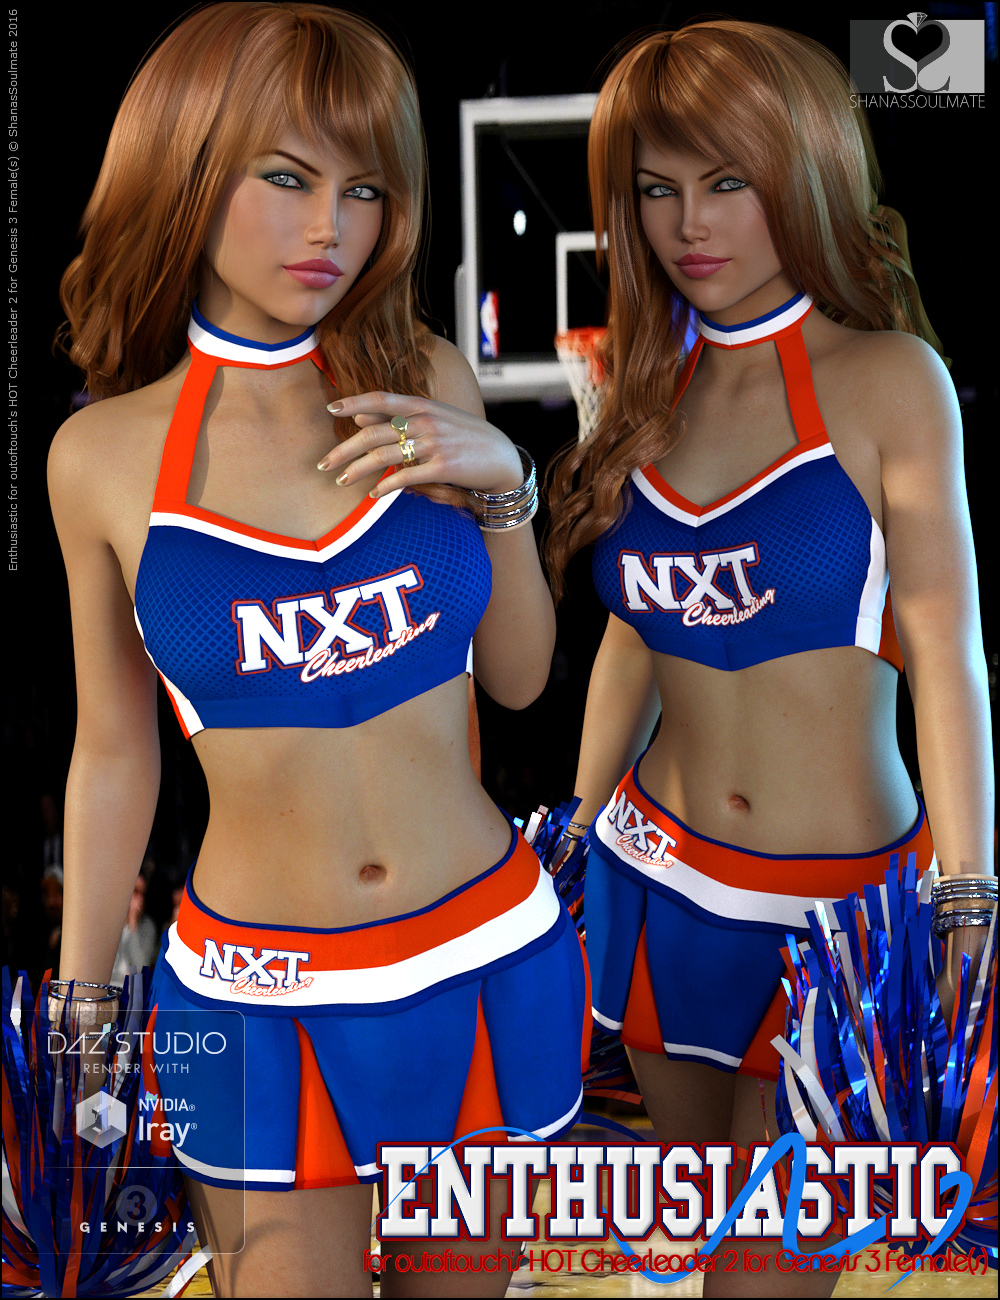 HOT Cheerleader 2 Enthusiastic Textures by: ShanasSoulmate, 3D Models by Daz 3D